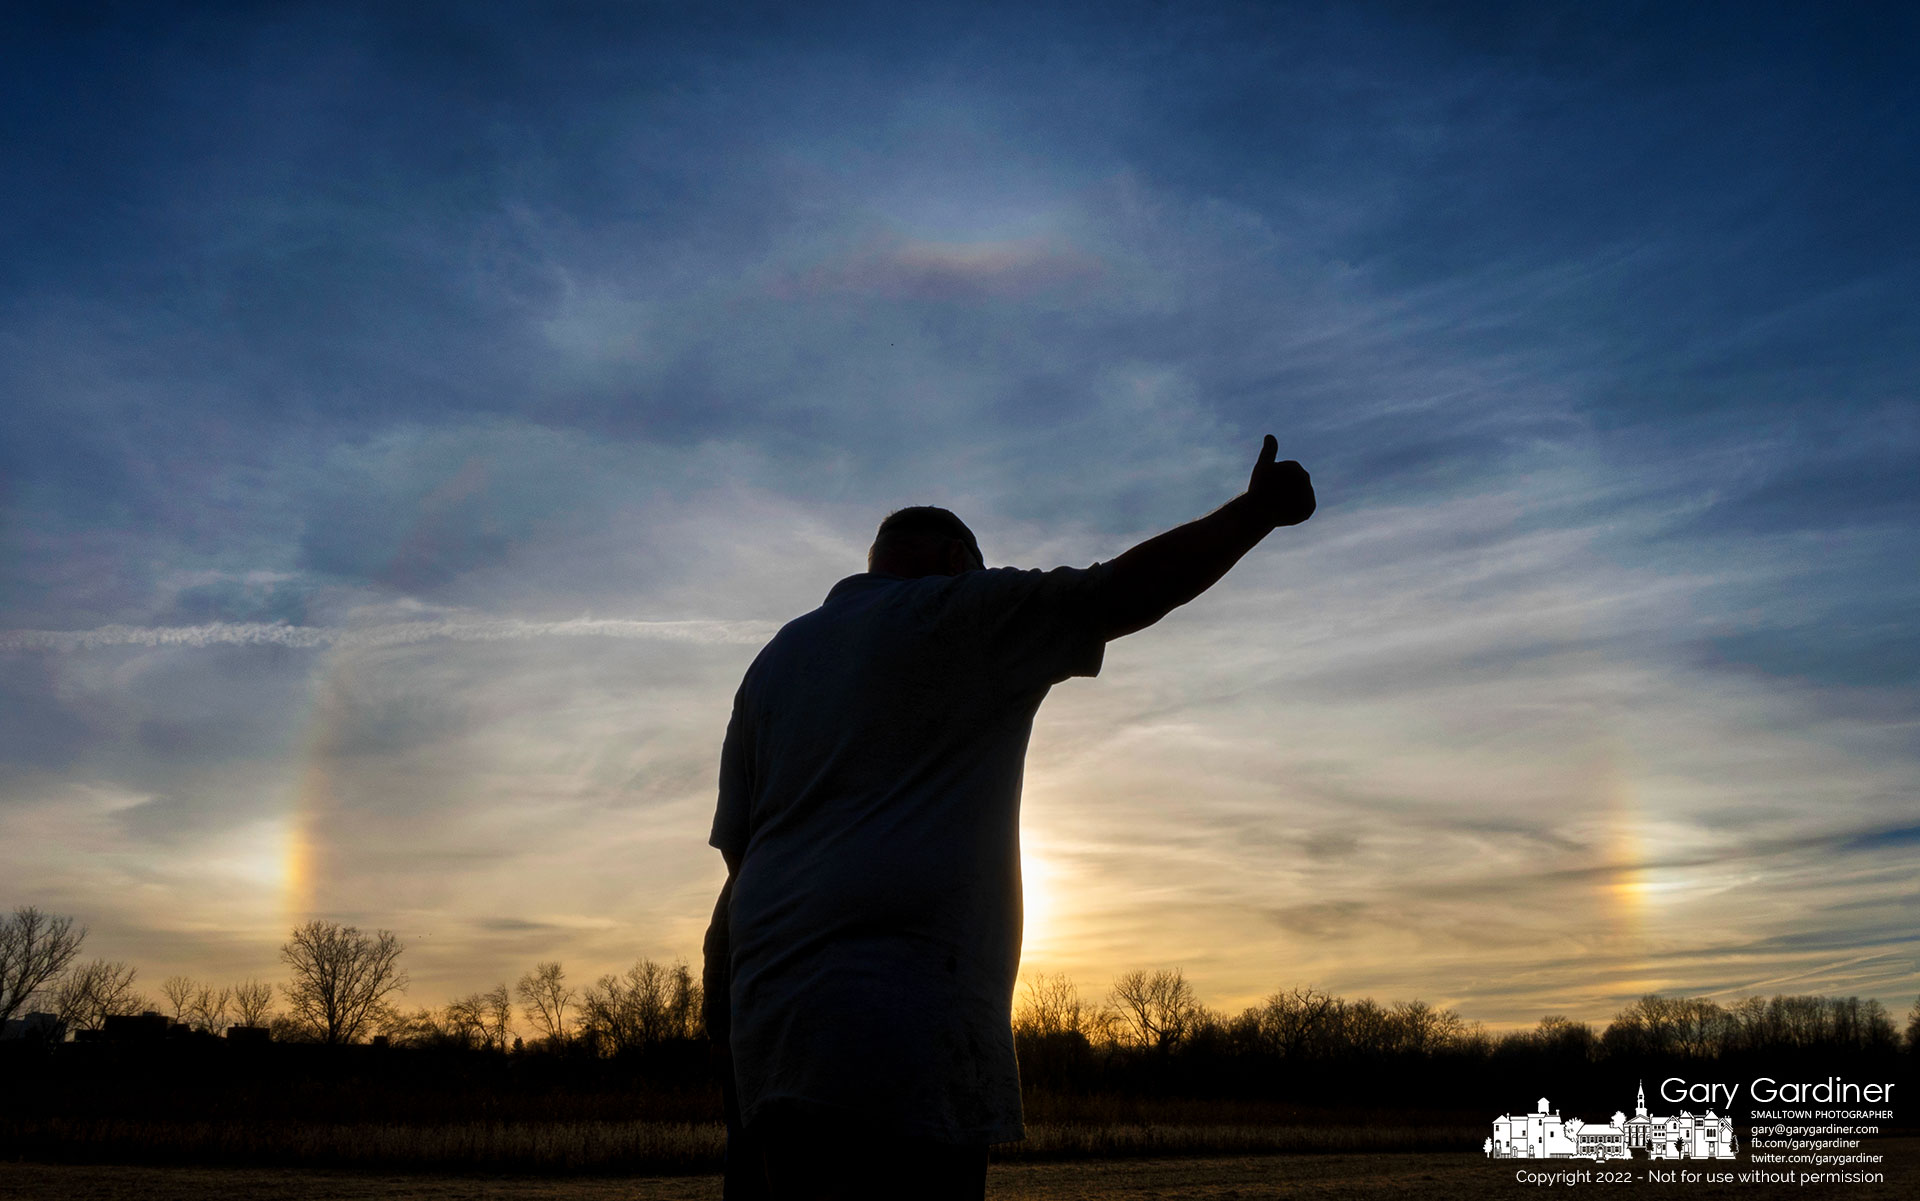 Kevin Scott is silhouetted against sun dogs as he signals a lift operator instructions to move repair parts into position to fix the broken combine on the Braun Farm. My Final Photo for November 10, 2022.